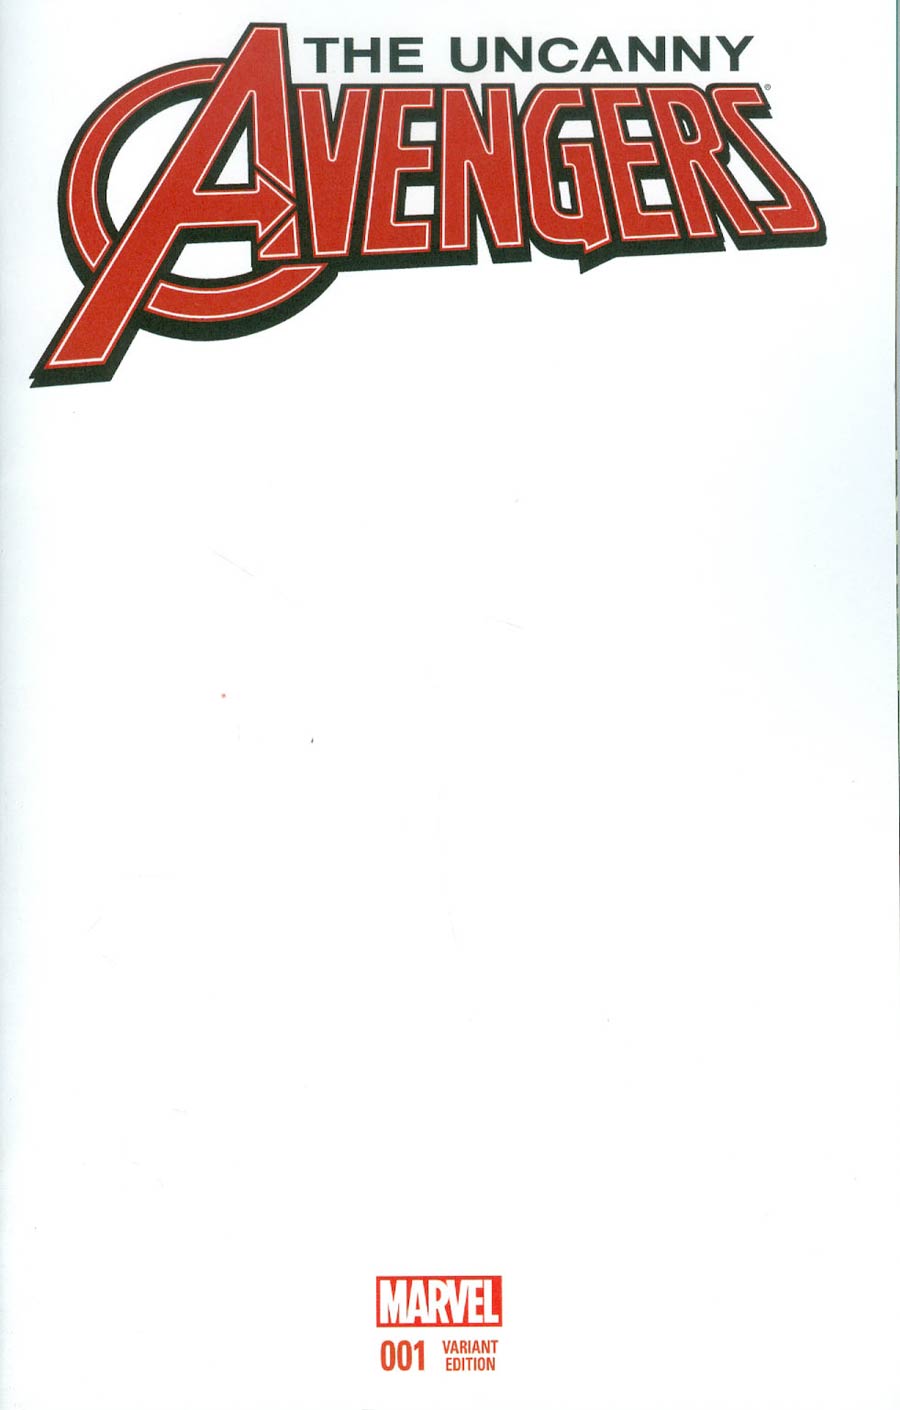 Uncanny Avengers Vol 3 #1 Cover C Variant Blank Cover